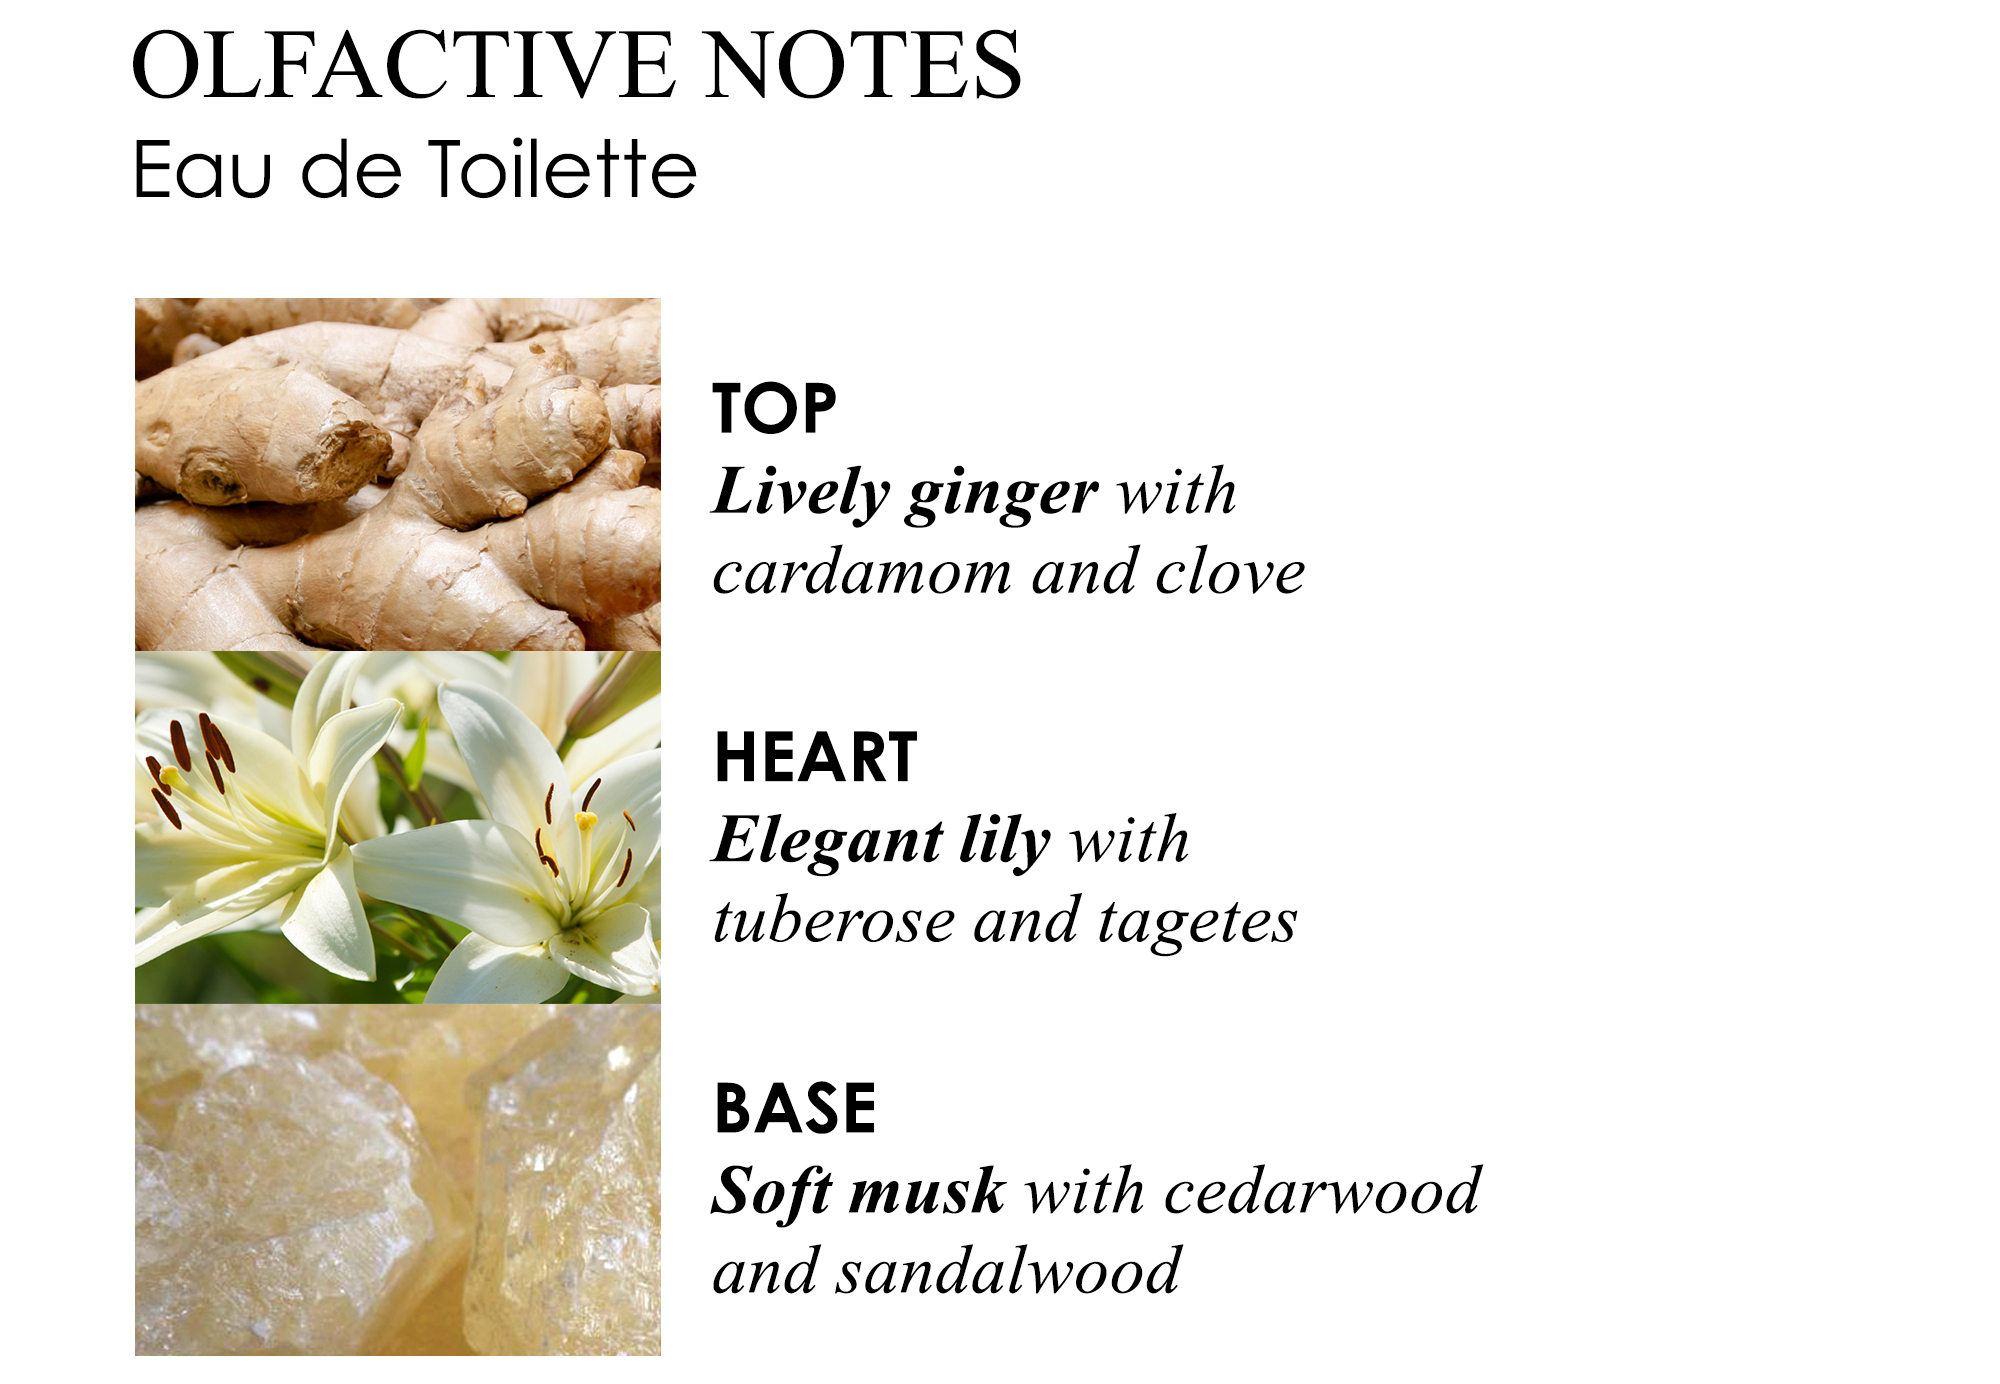 Olfactive Notes Eau de Toilette, Top lively ginger with cardamon and clove, Heart elegant lily with tuberose and tagetes, Base soft musk with cedarwood and sandalwood.